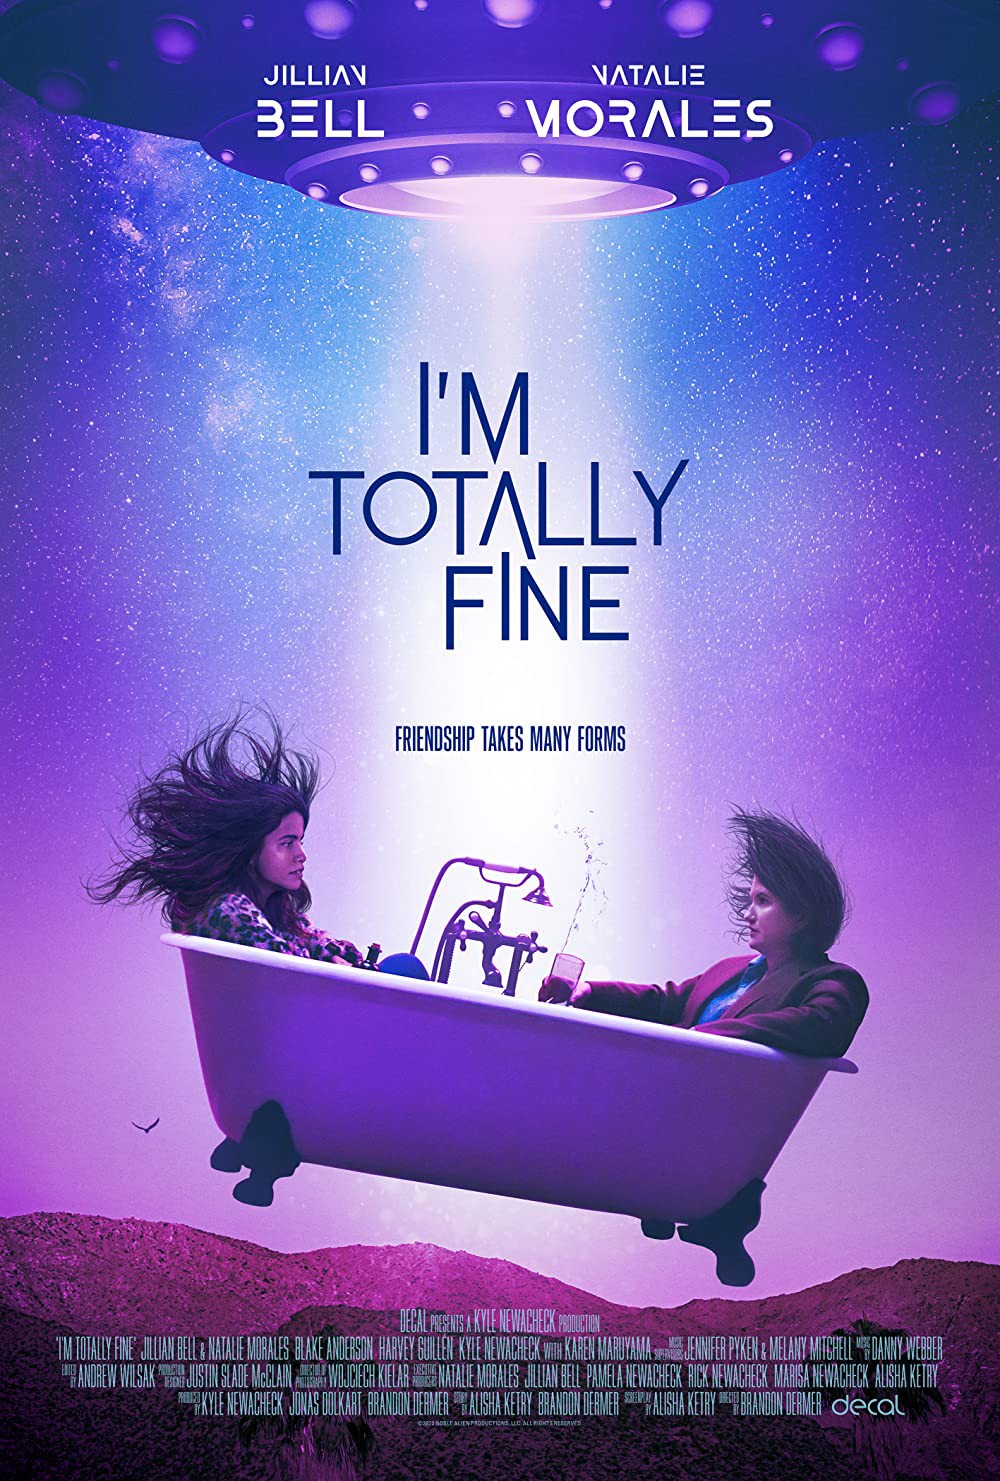 I'm TOTALLY FINE available now on digital and on demand